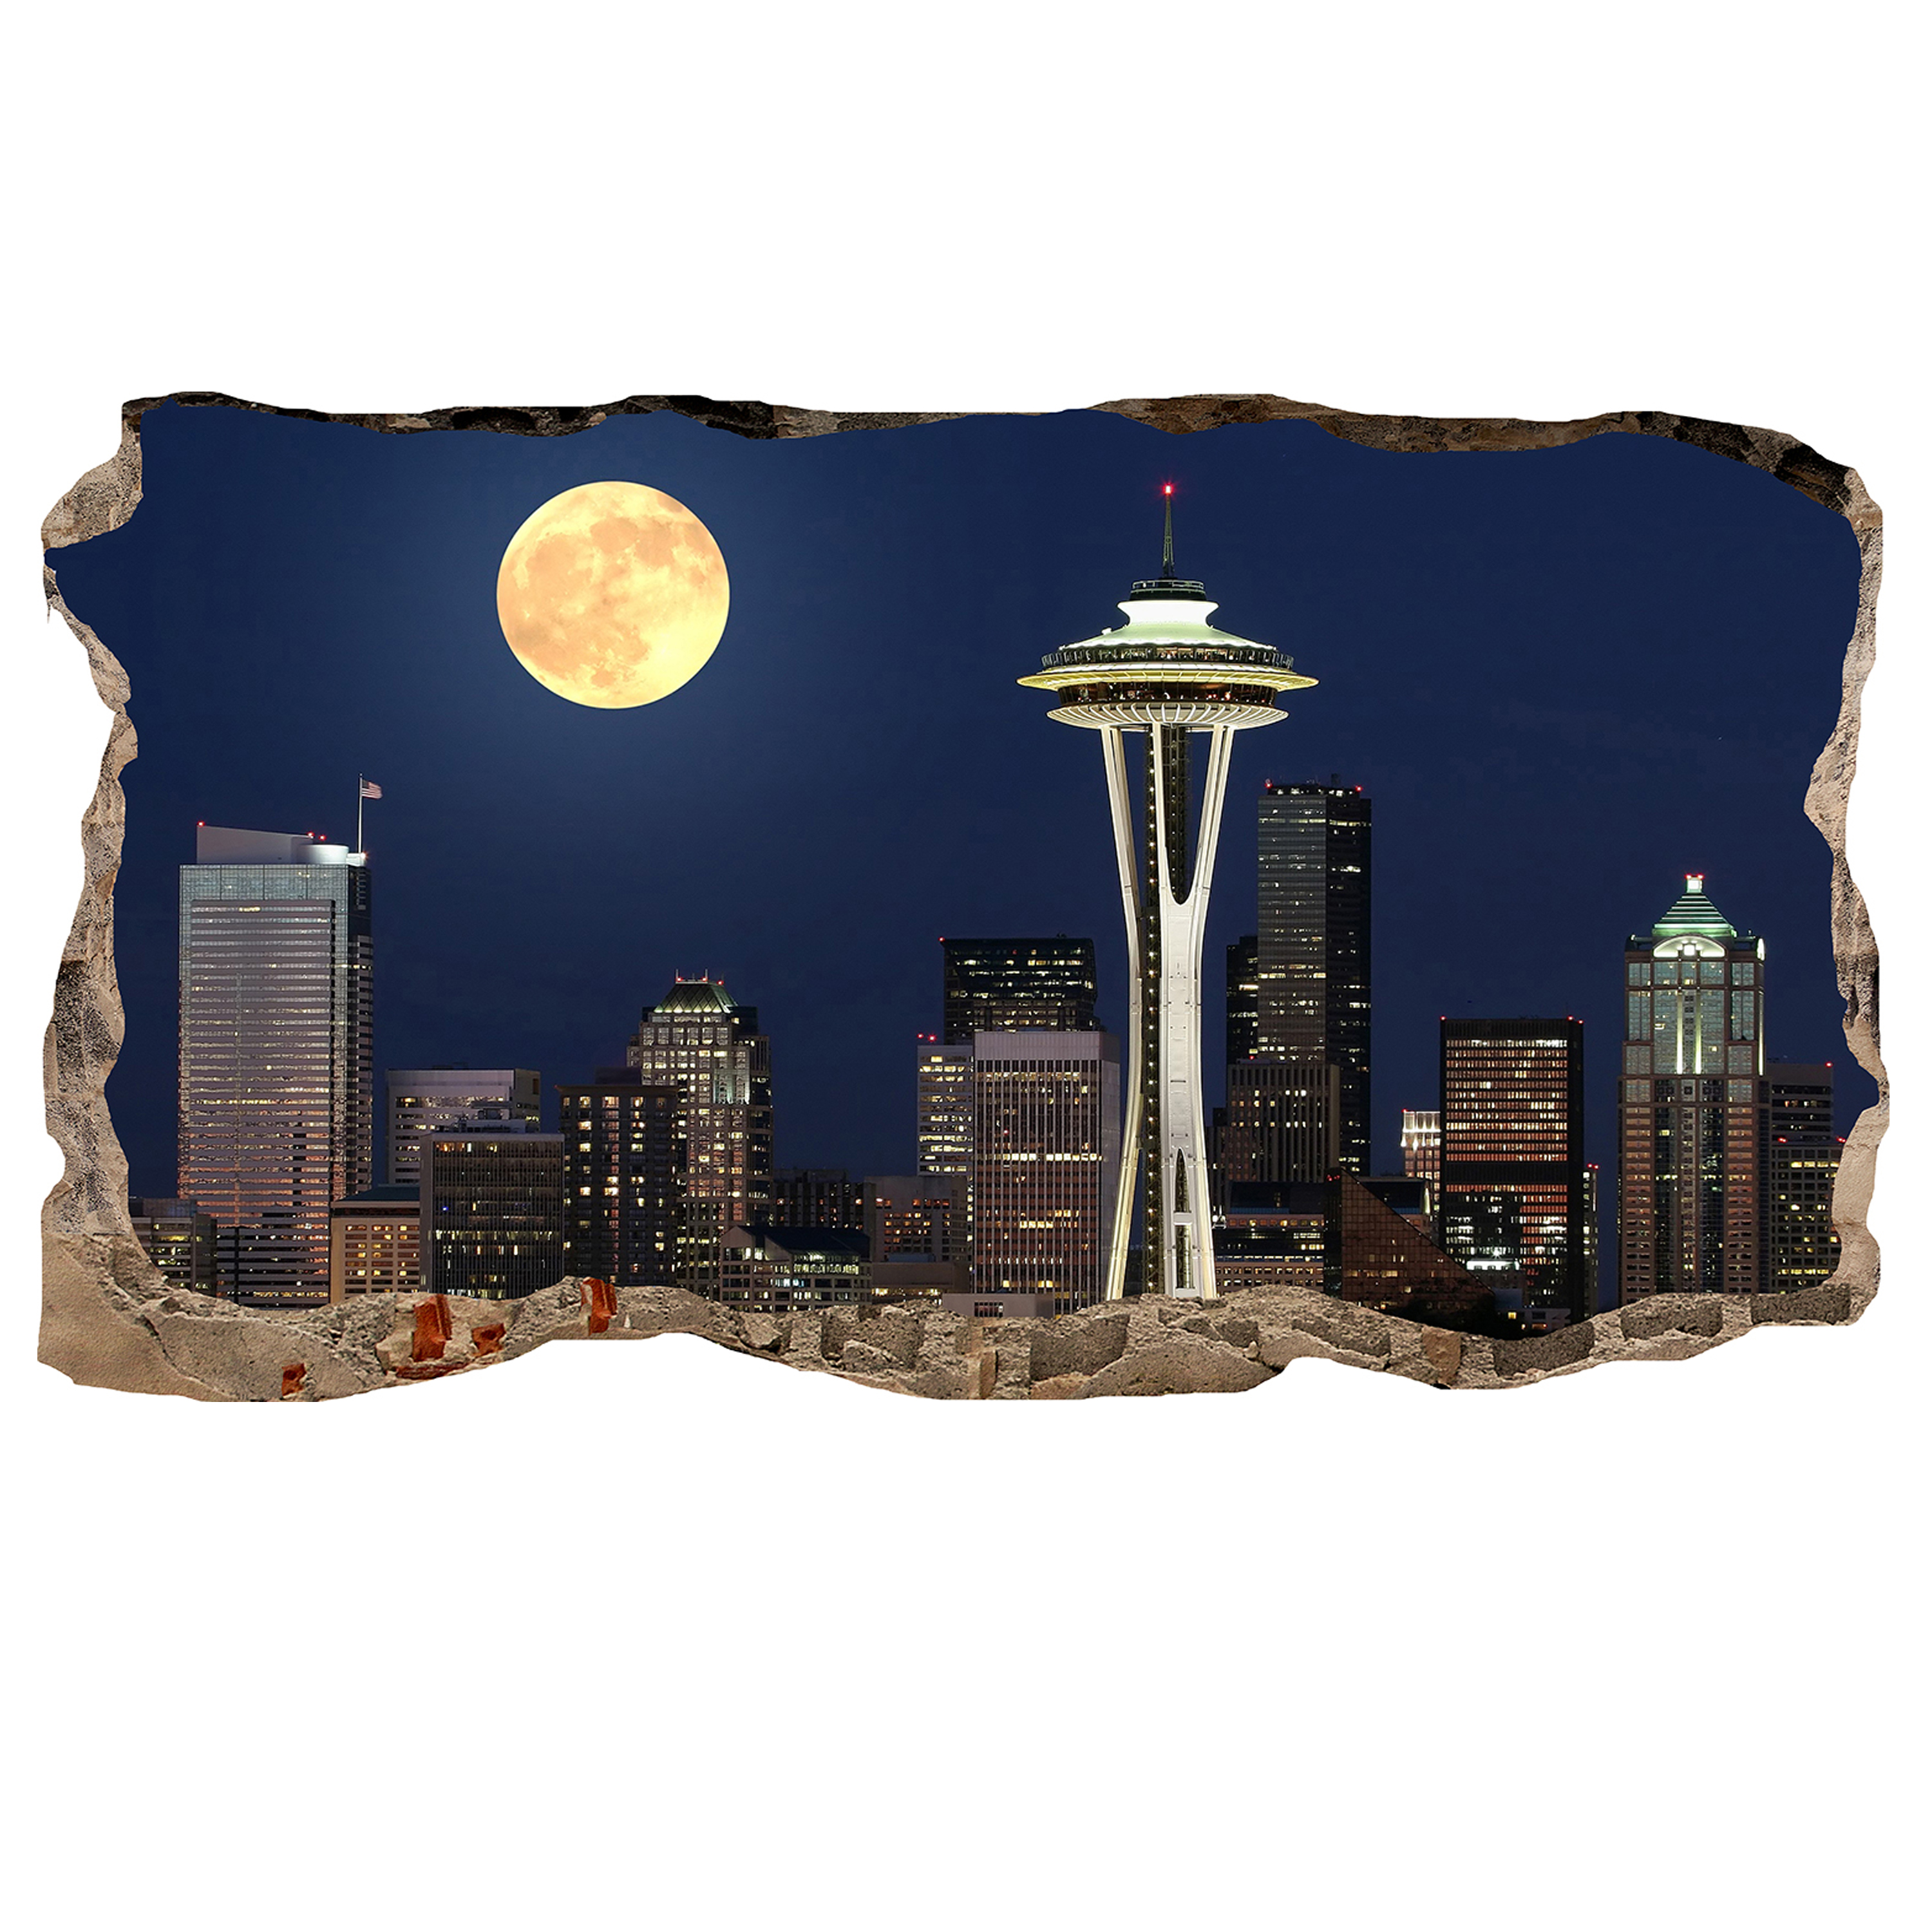 Startonight 3D Mural Wall Art Photo Decor Window Moon on the City Amazing Dual View Surprise Large 47.24 By 86.61 inch Wall Mural Wallpaper Bedroom Urban Collection Wall Paper Art - image 3 of 4